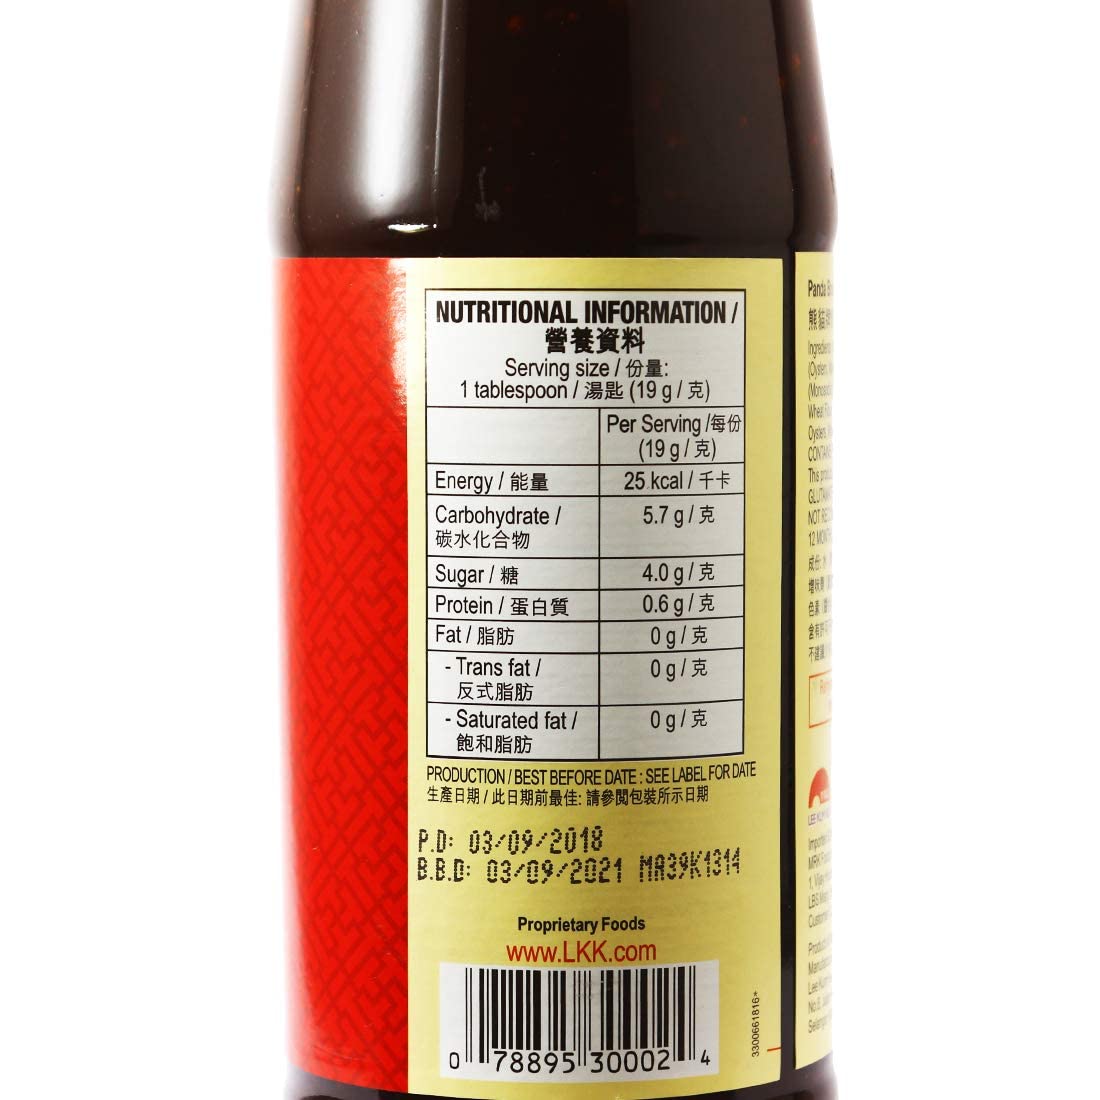 Lee Kum Kee Panda Oyster Sauce, 510g (Imported)